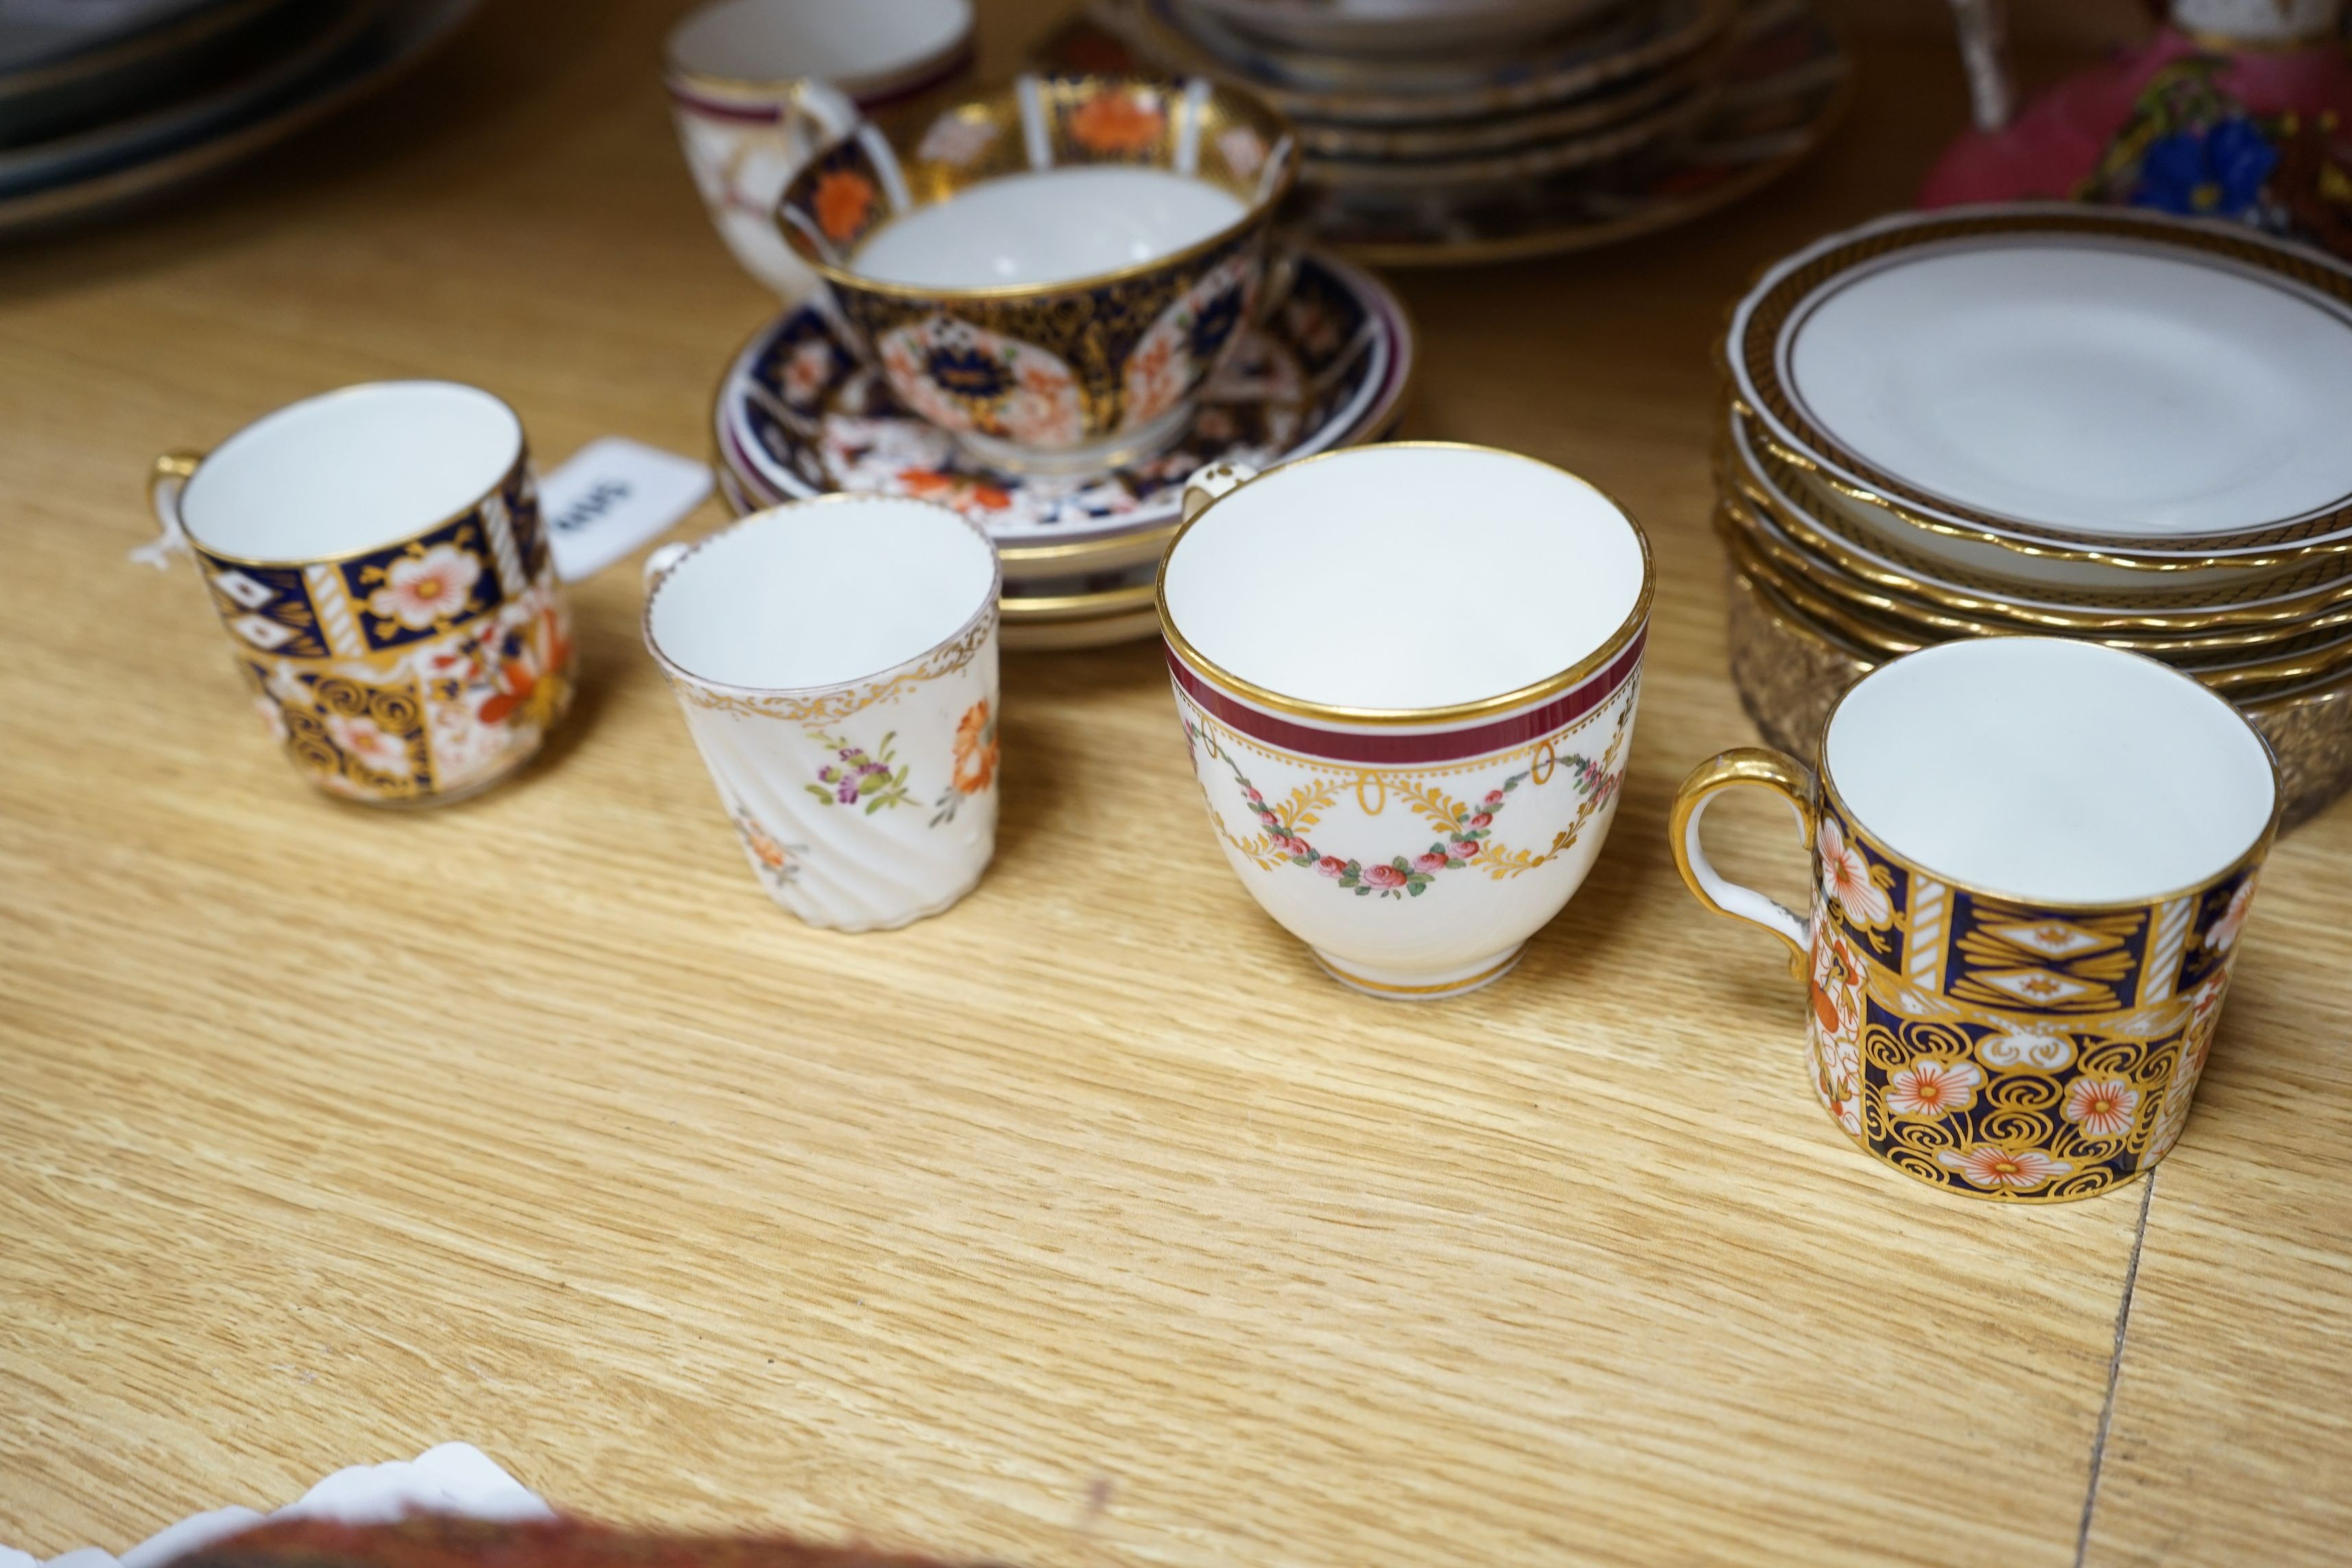 A group of Derby, Spode, Royal Crown Derby and other decorative tea wares